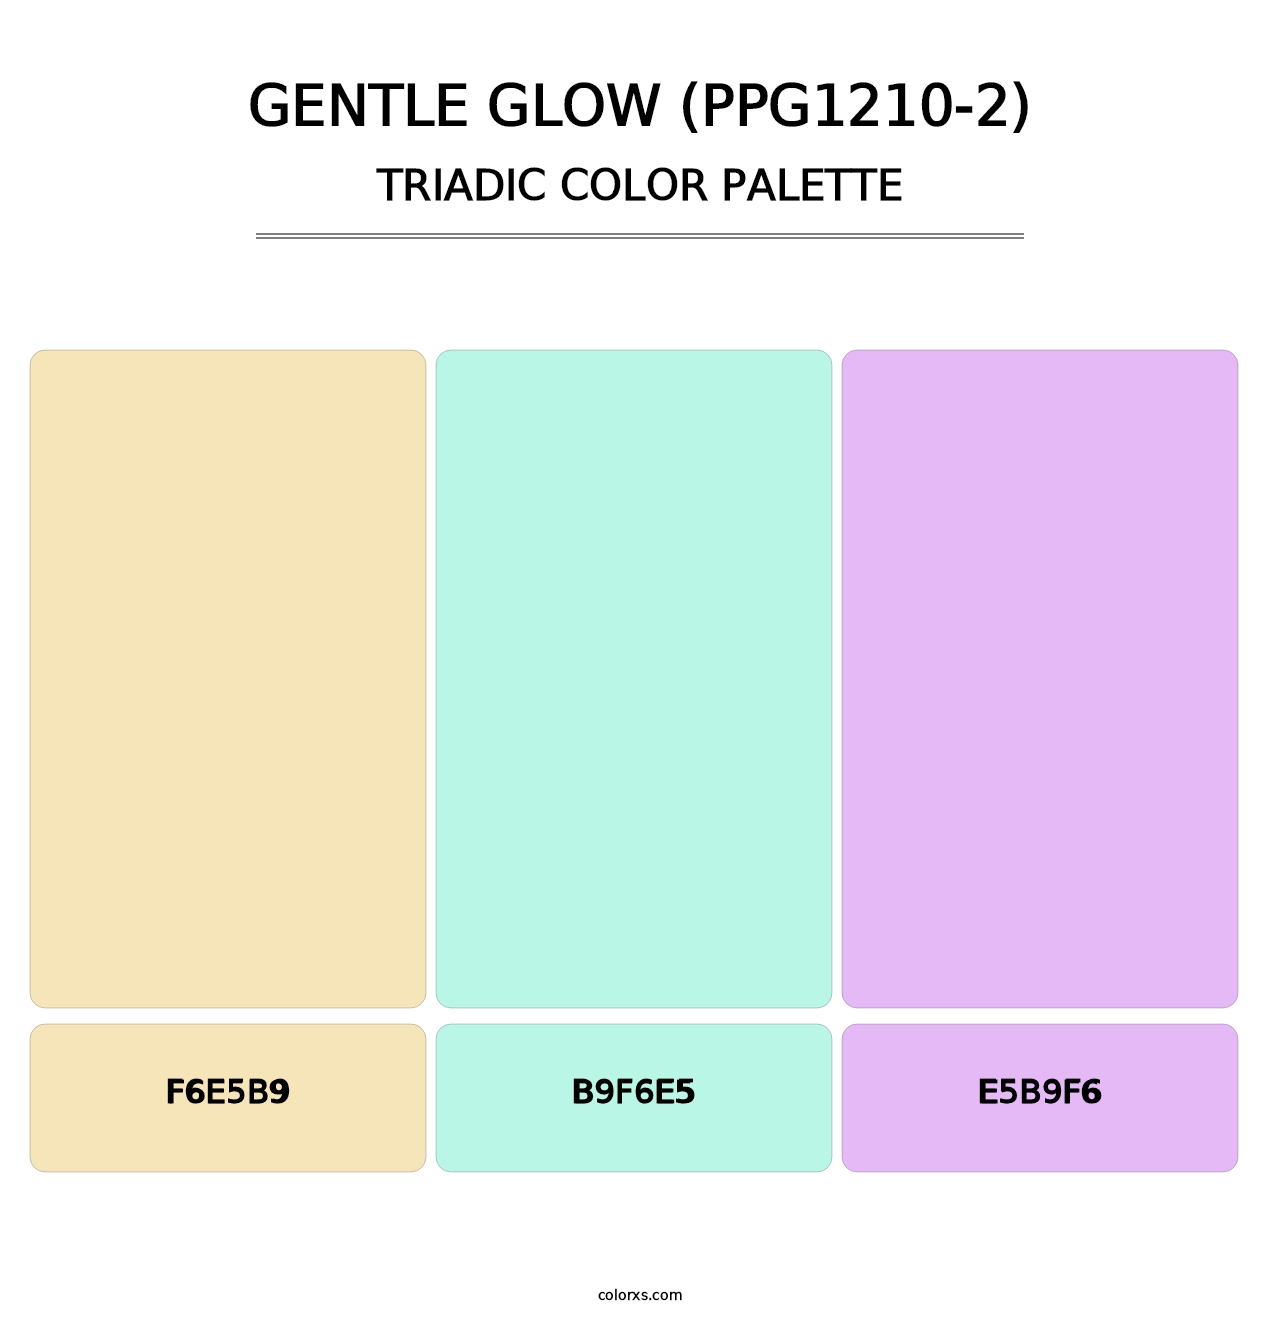 Gentle Glow (PPG1210-2) - Triadic Color Palette